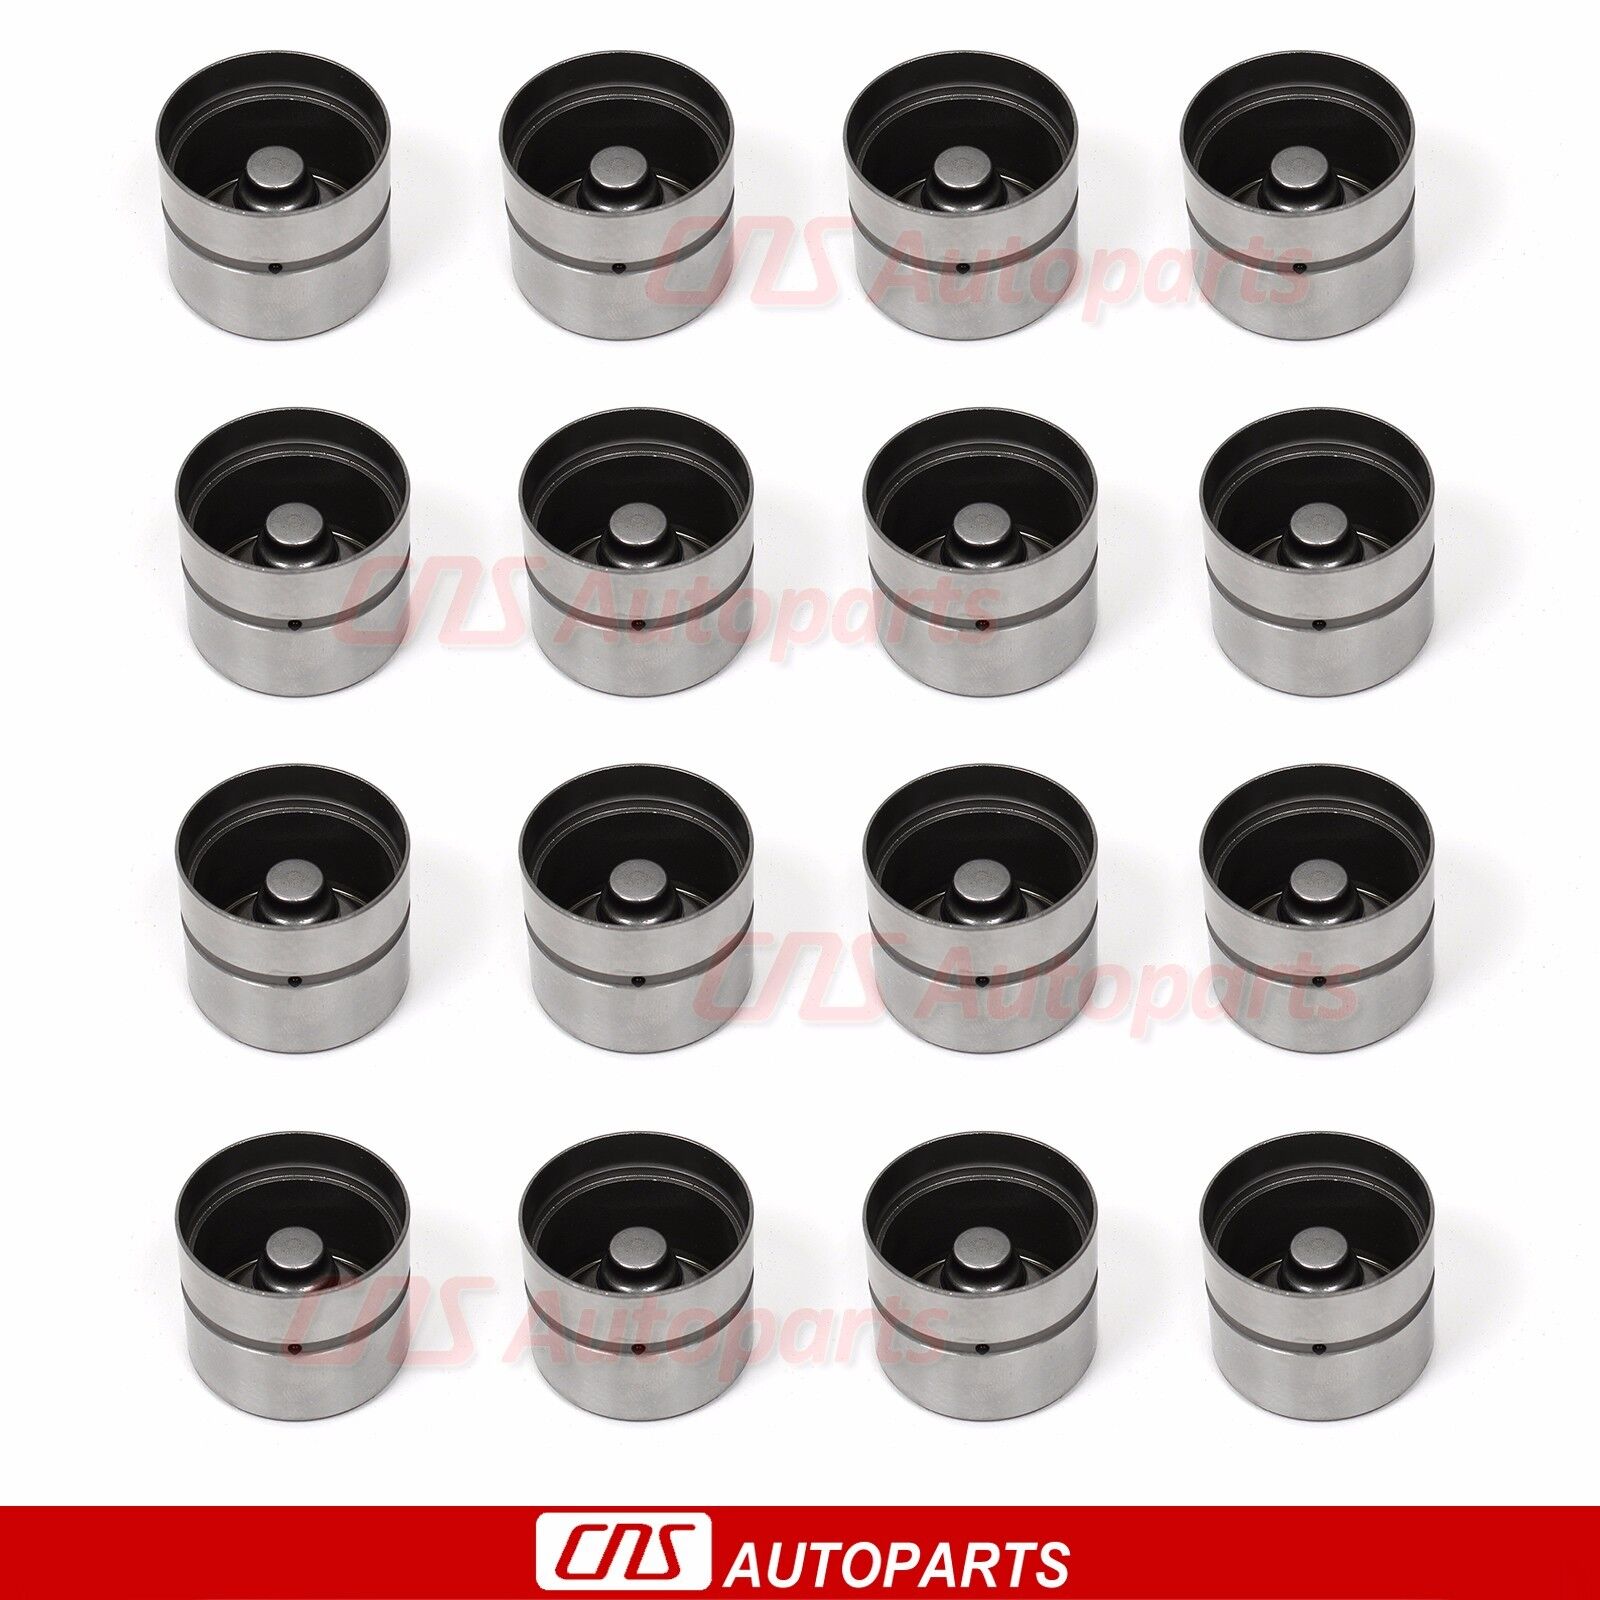 16-Valve Lifters For 04-08 Suzuki Forenza Reno 2.0L Camshaft Follwers